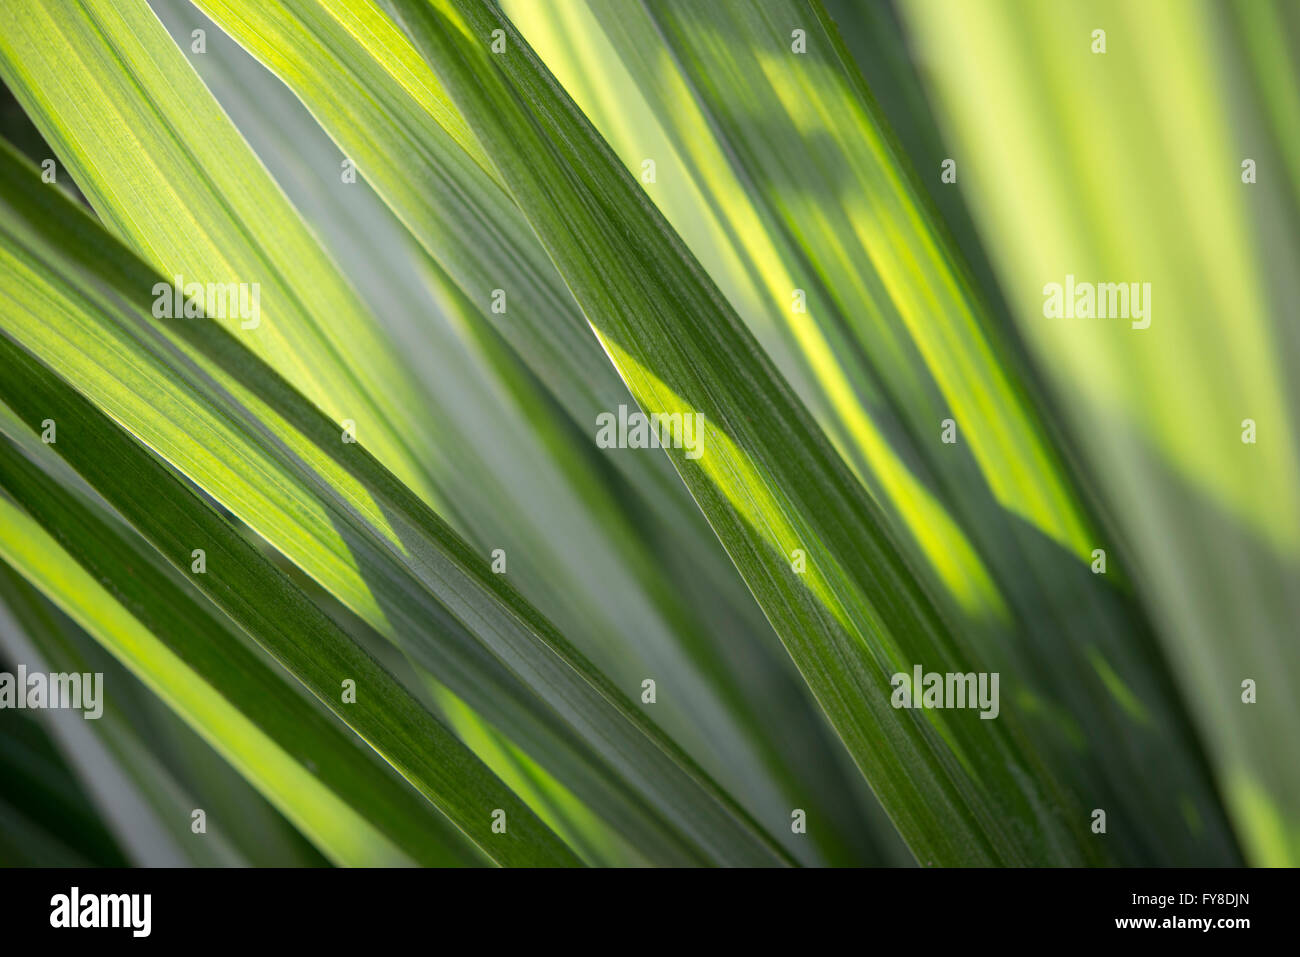 Abstract image of Astelia foliage with sunlight creating a striped pattern. Stock Photo